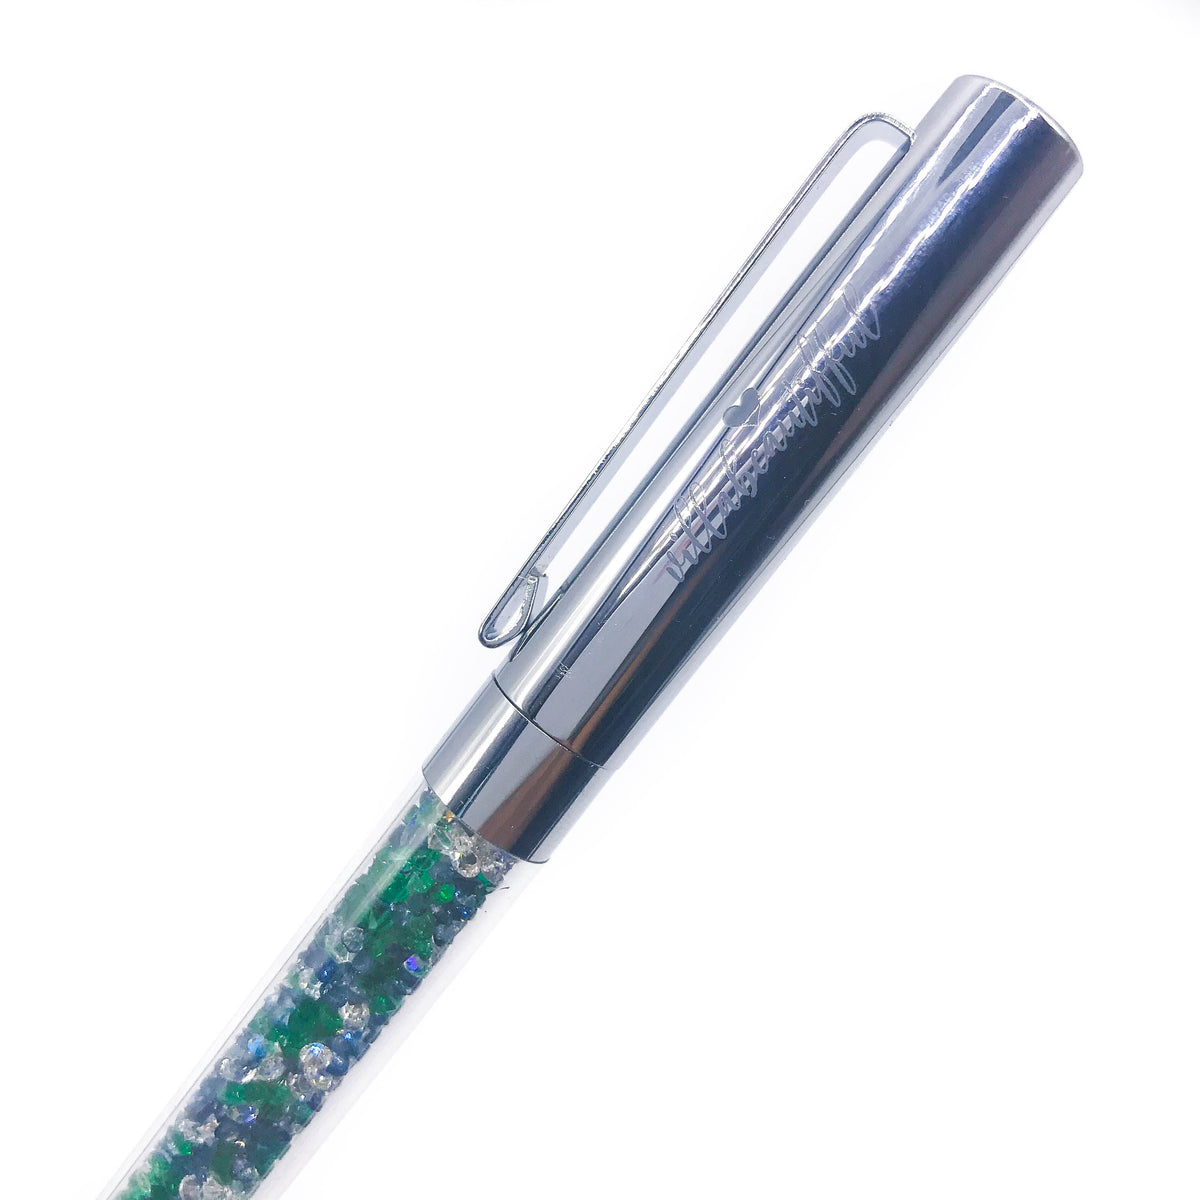 Sea-Gal Imperfect Crystal VBPen | limited pen